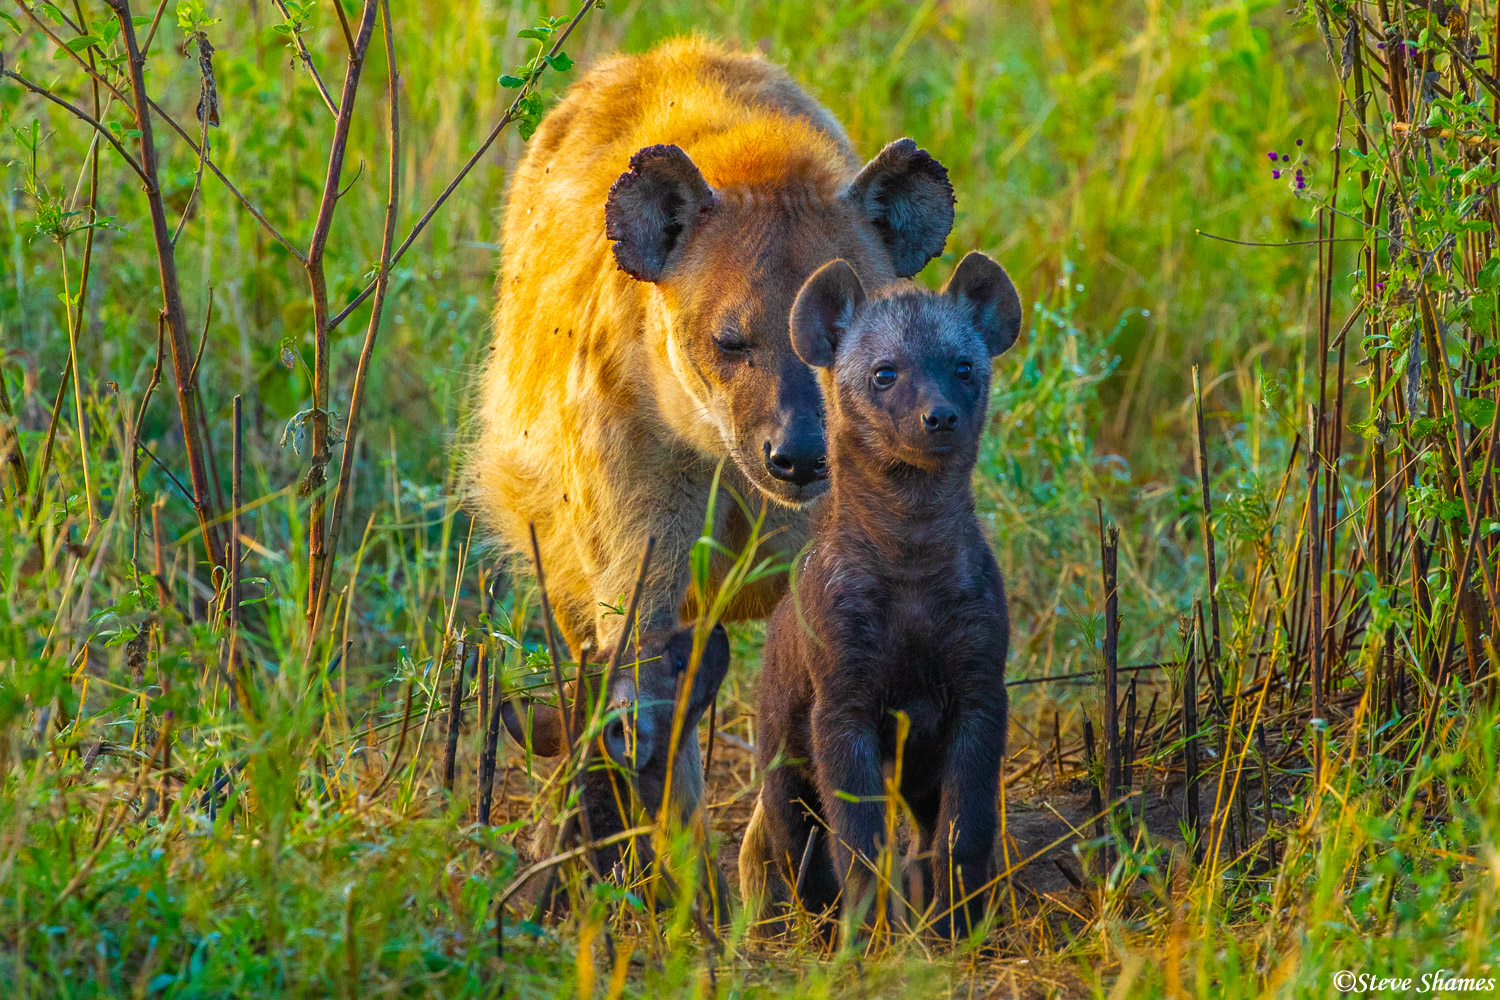 Life at the den. This hyena pup is under the careful watch of its mother.